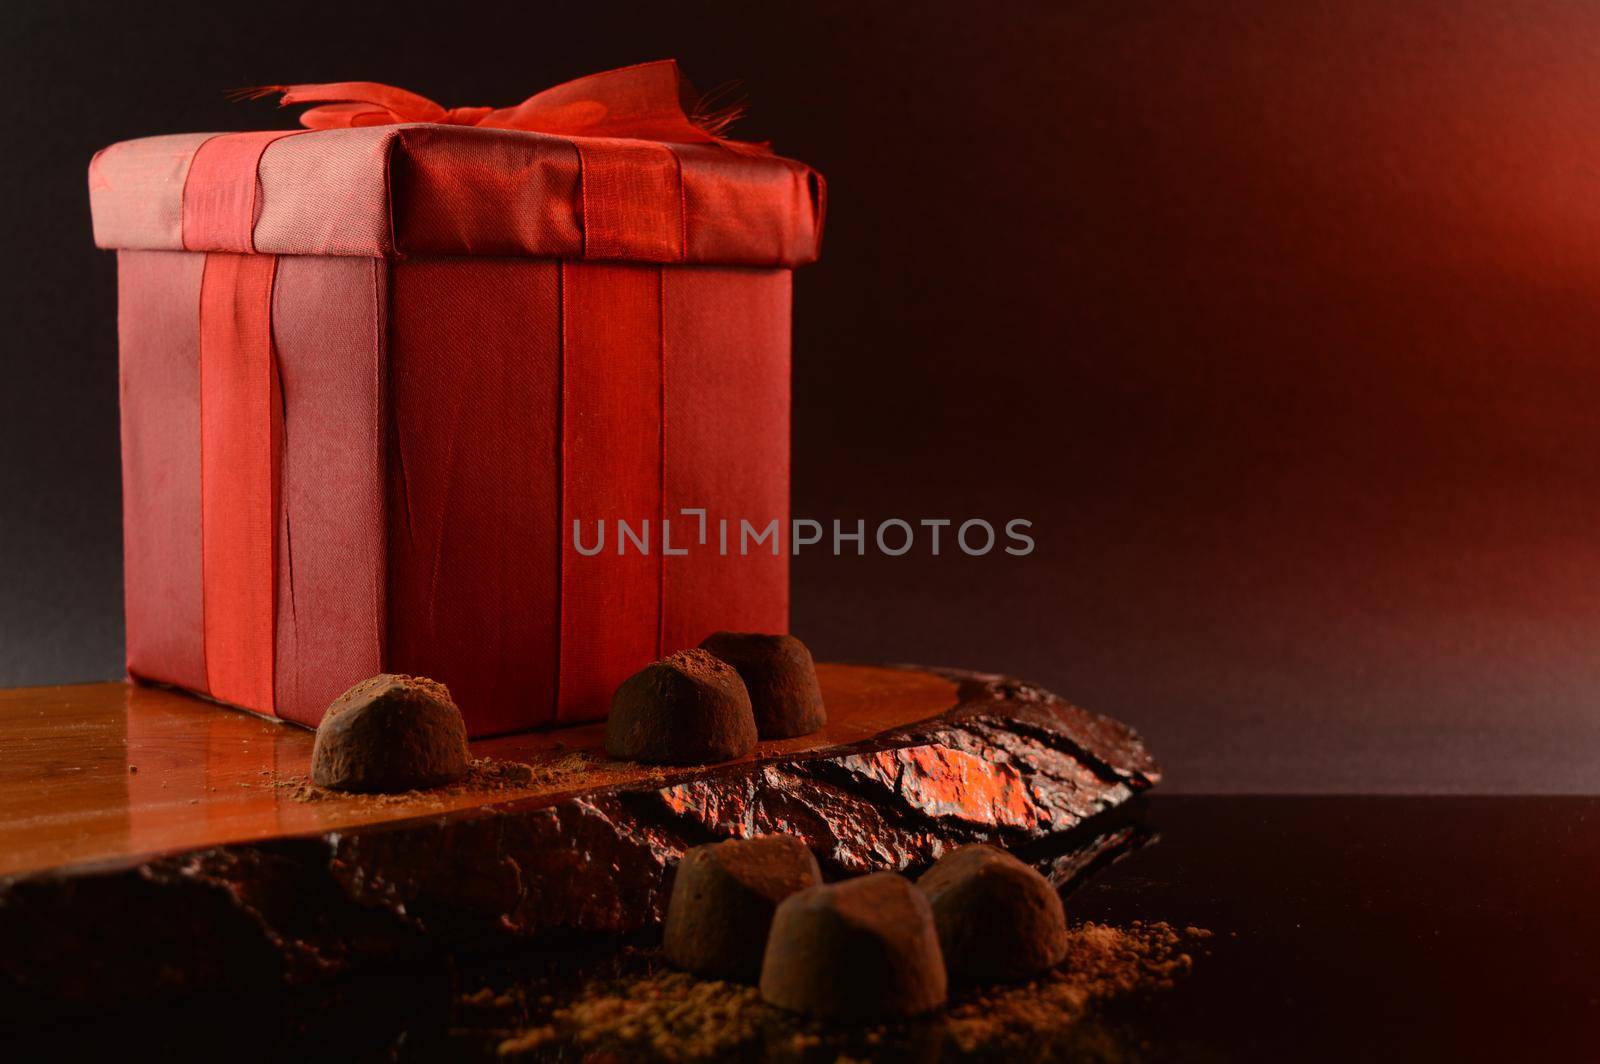 A red gift box and fine chocolate truffles to set a romantic scene.